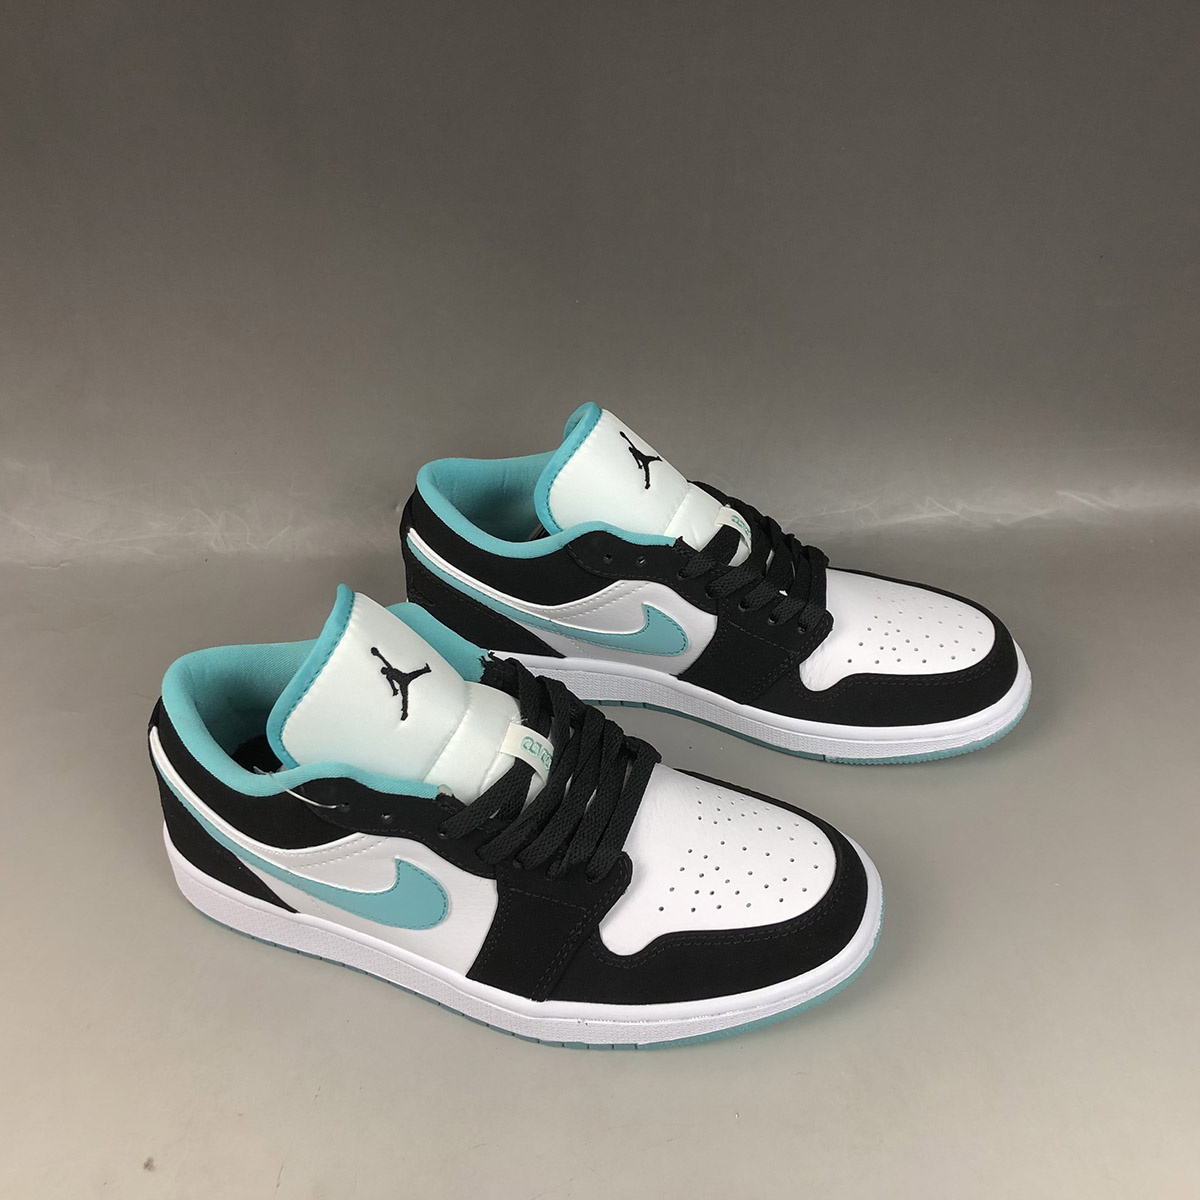 Air Jordan 1 Low White Black Island Green For Sale The Sole Line